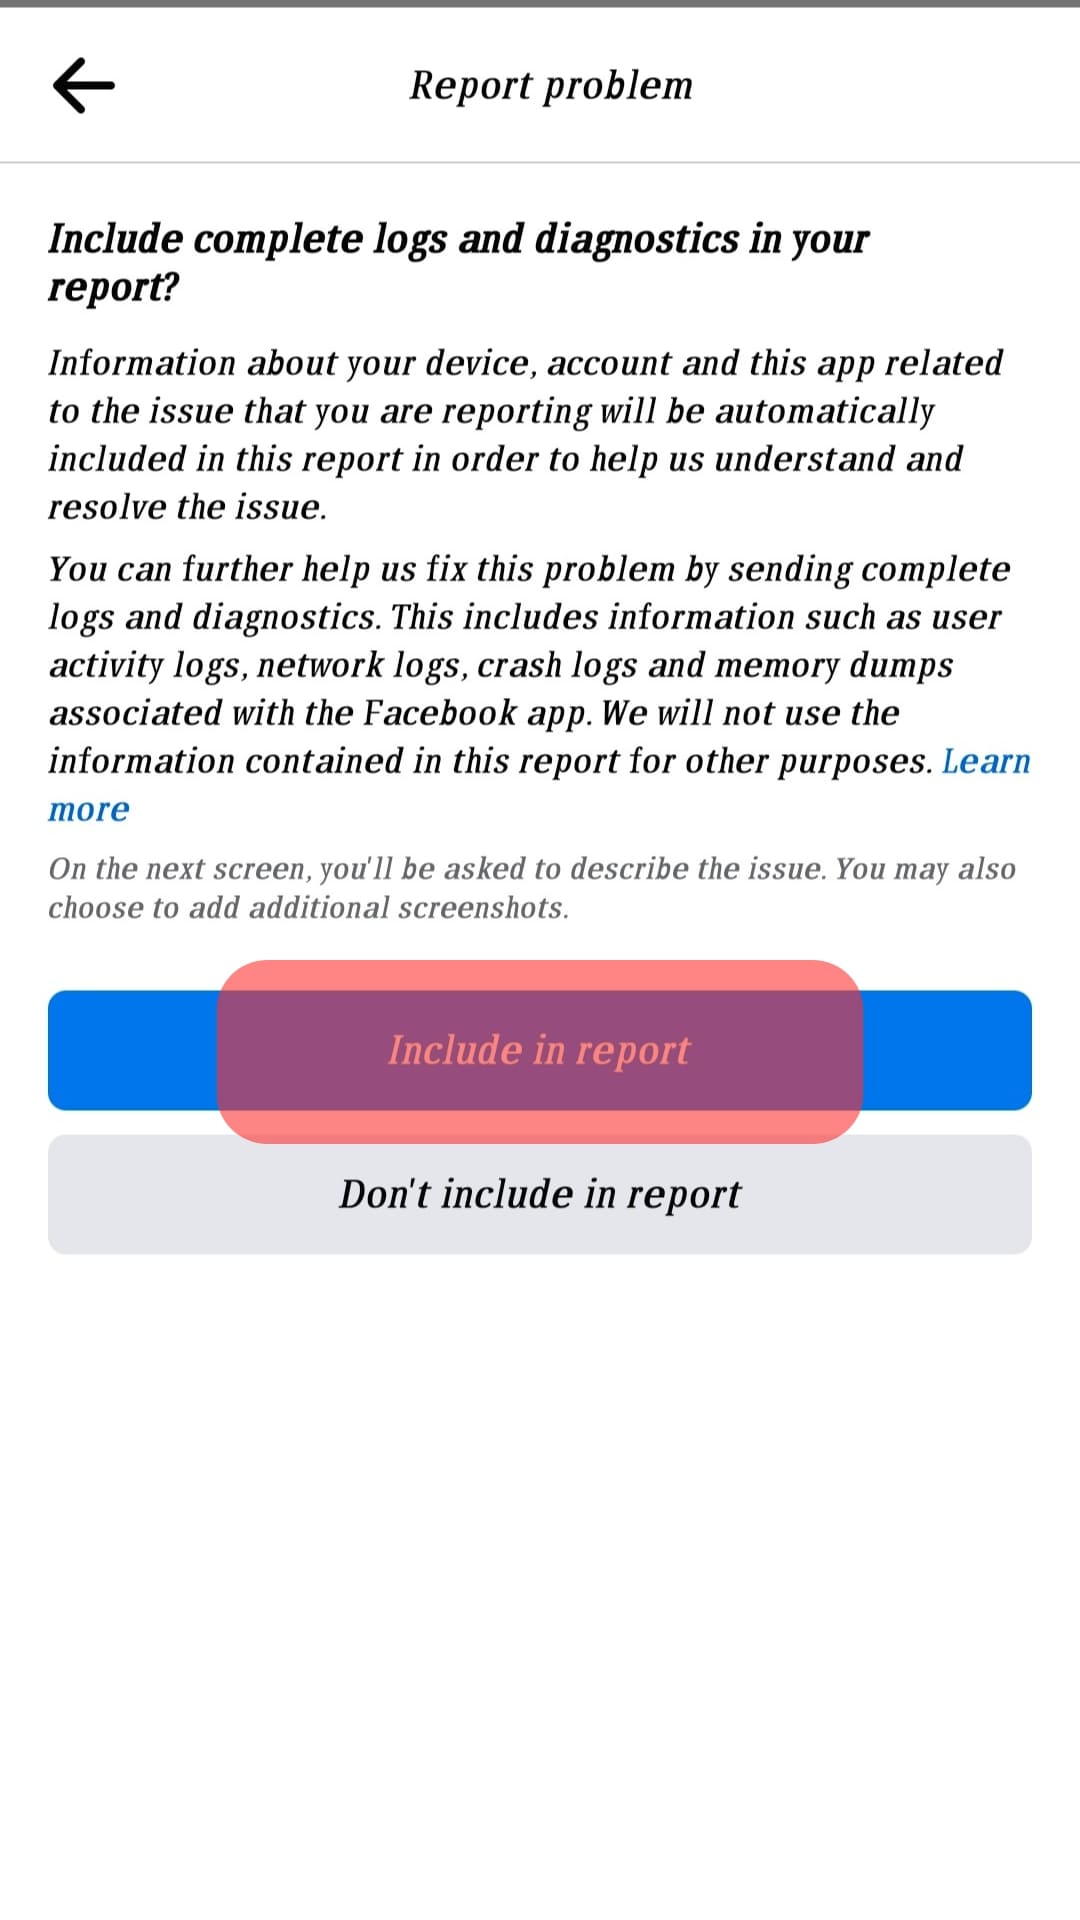 Tap On Include In Report.